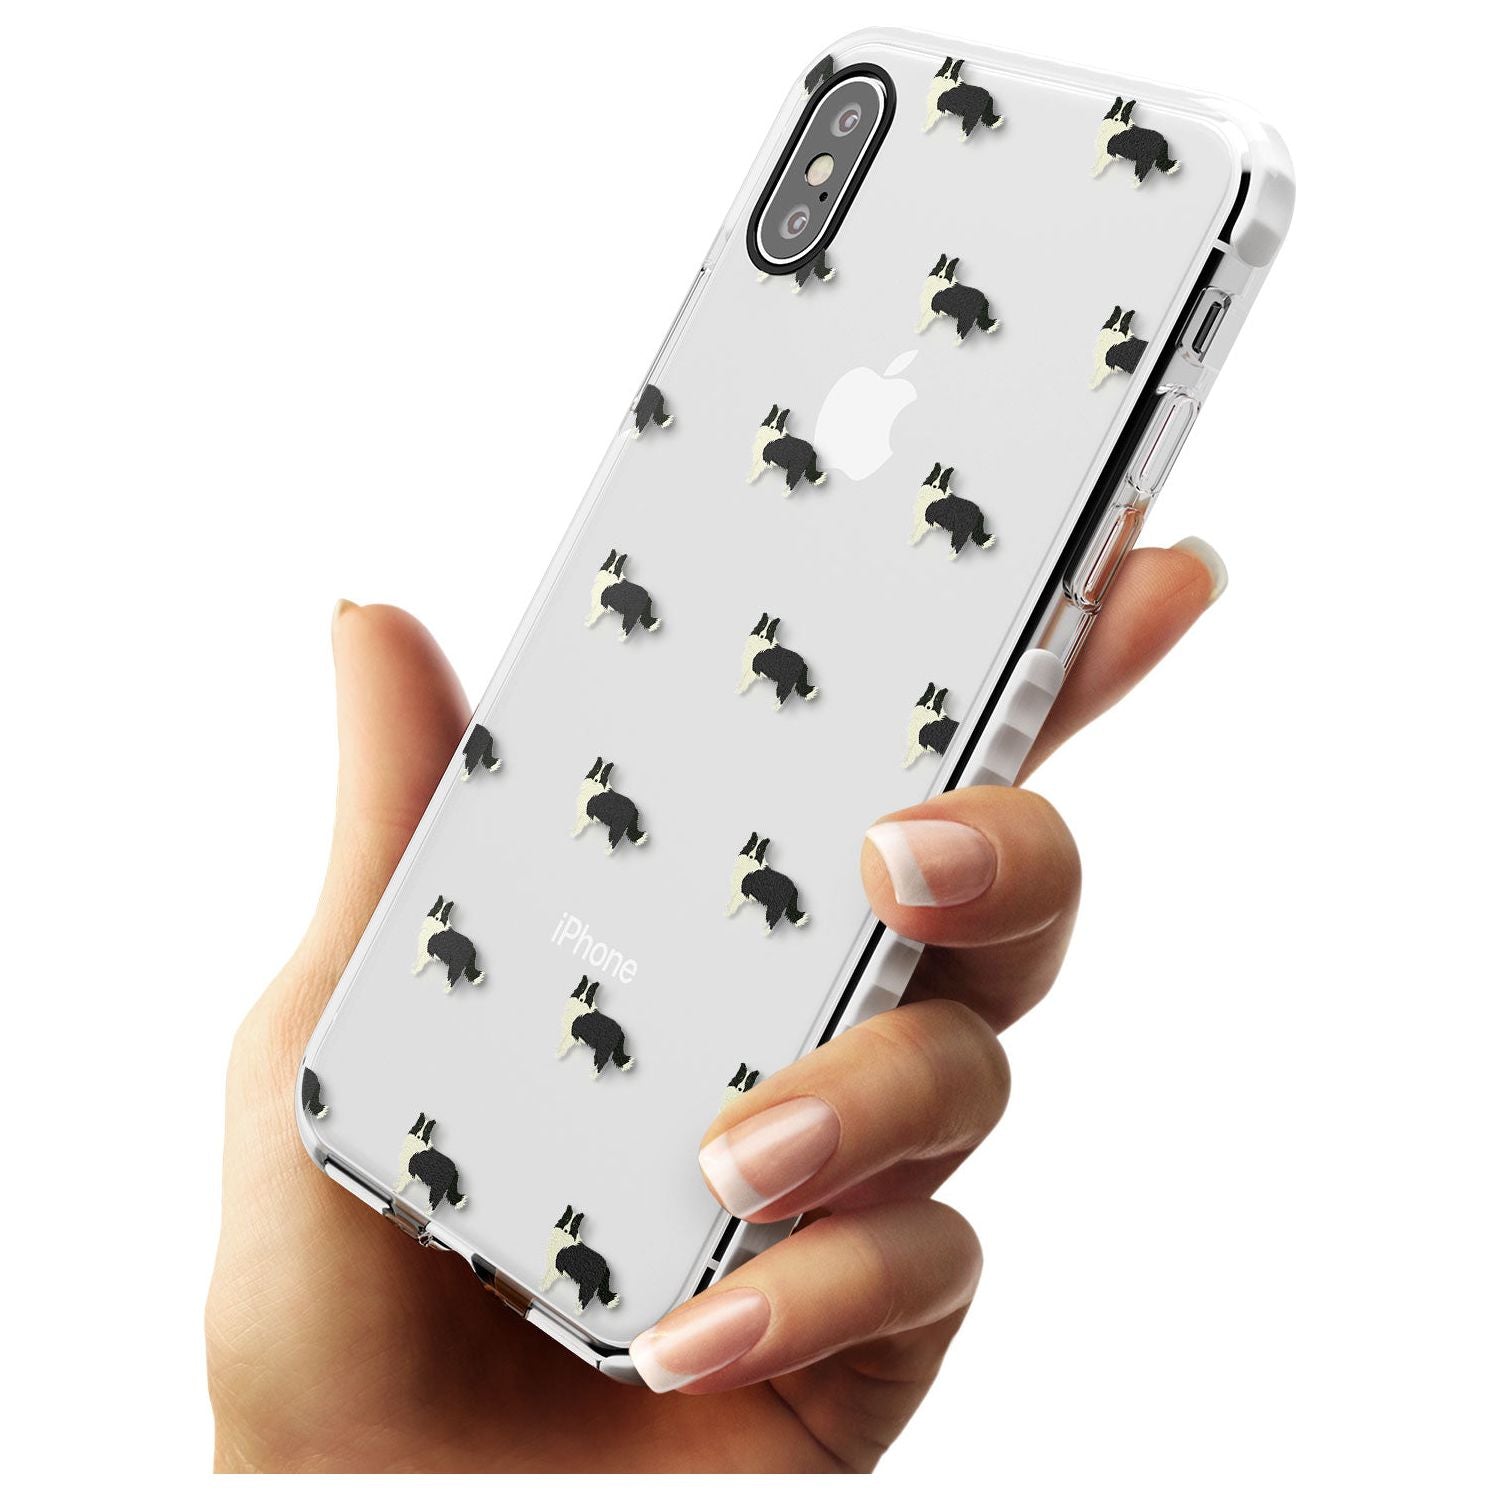 Border Collie Dog Pattern Clear Impact Phone Case for iPhone X XS Max XR